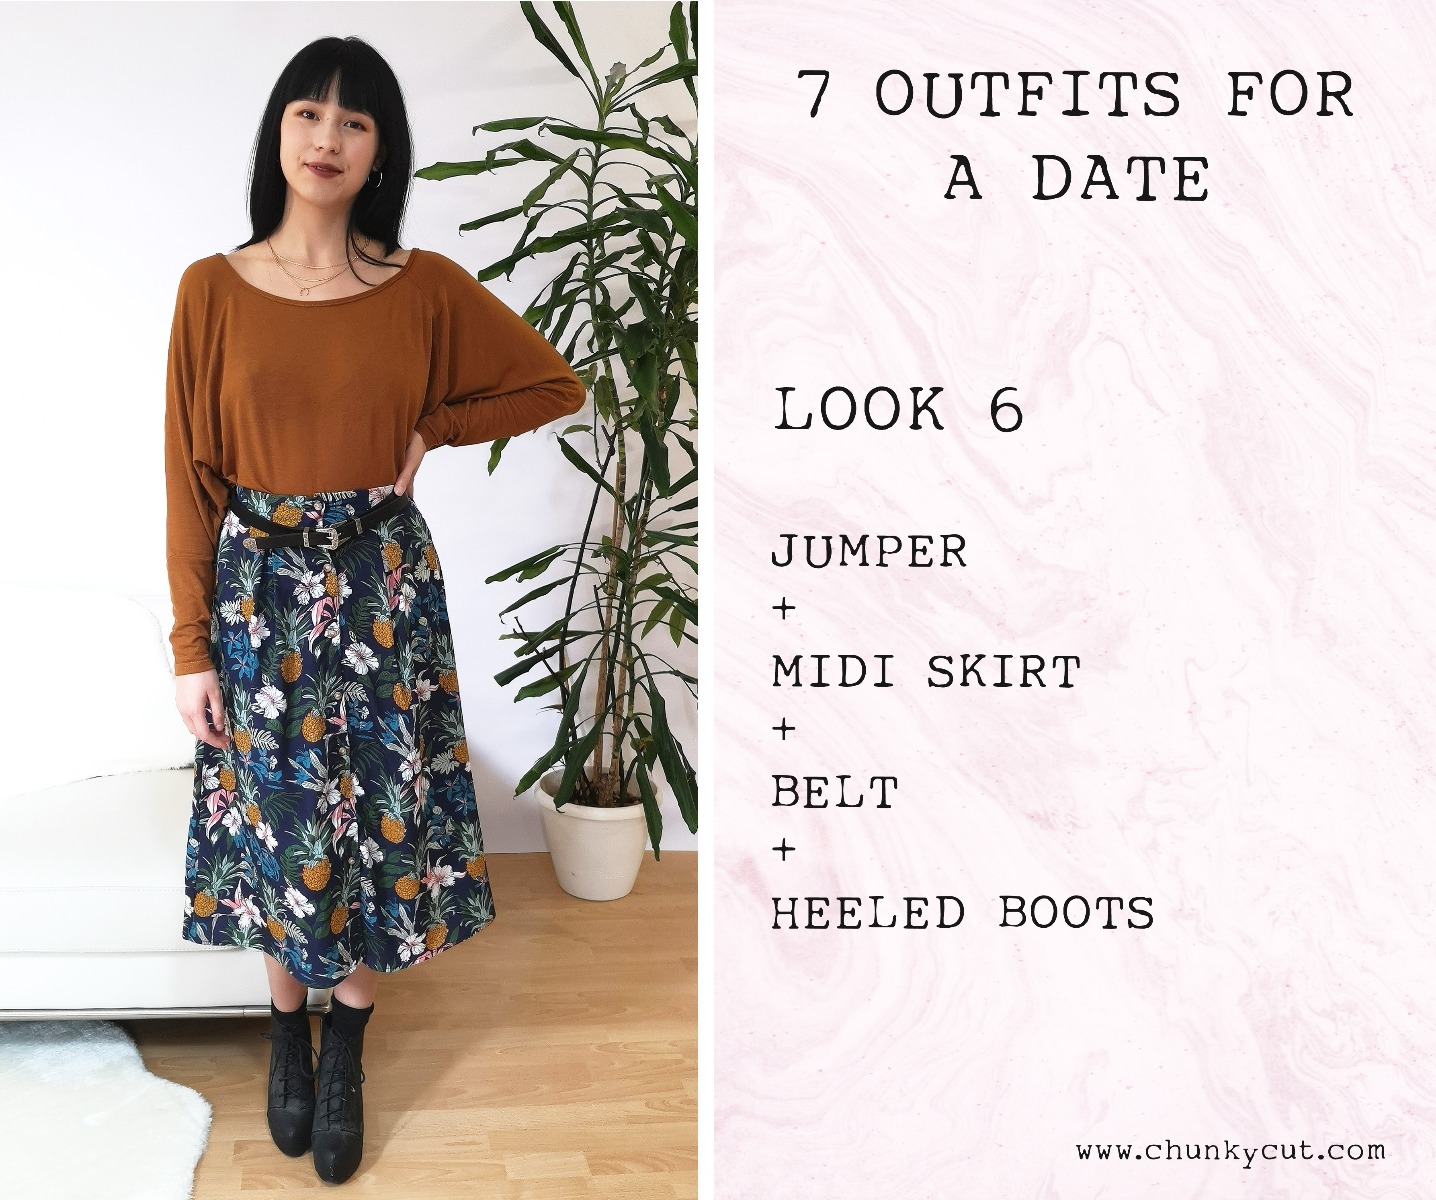 Look 6 with mid-skirt, jumper, belt, heeled boots